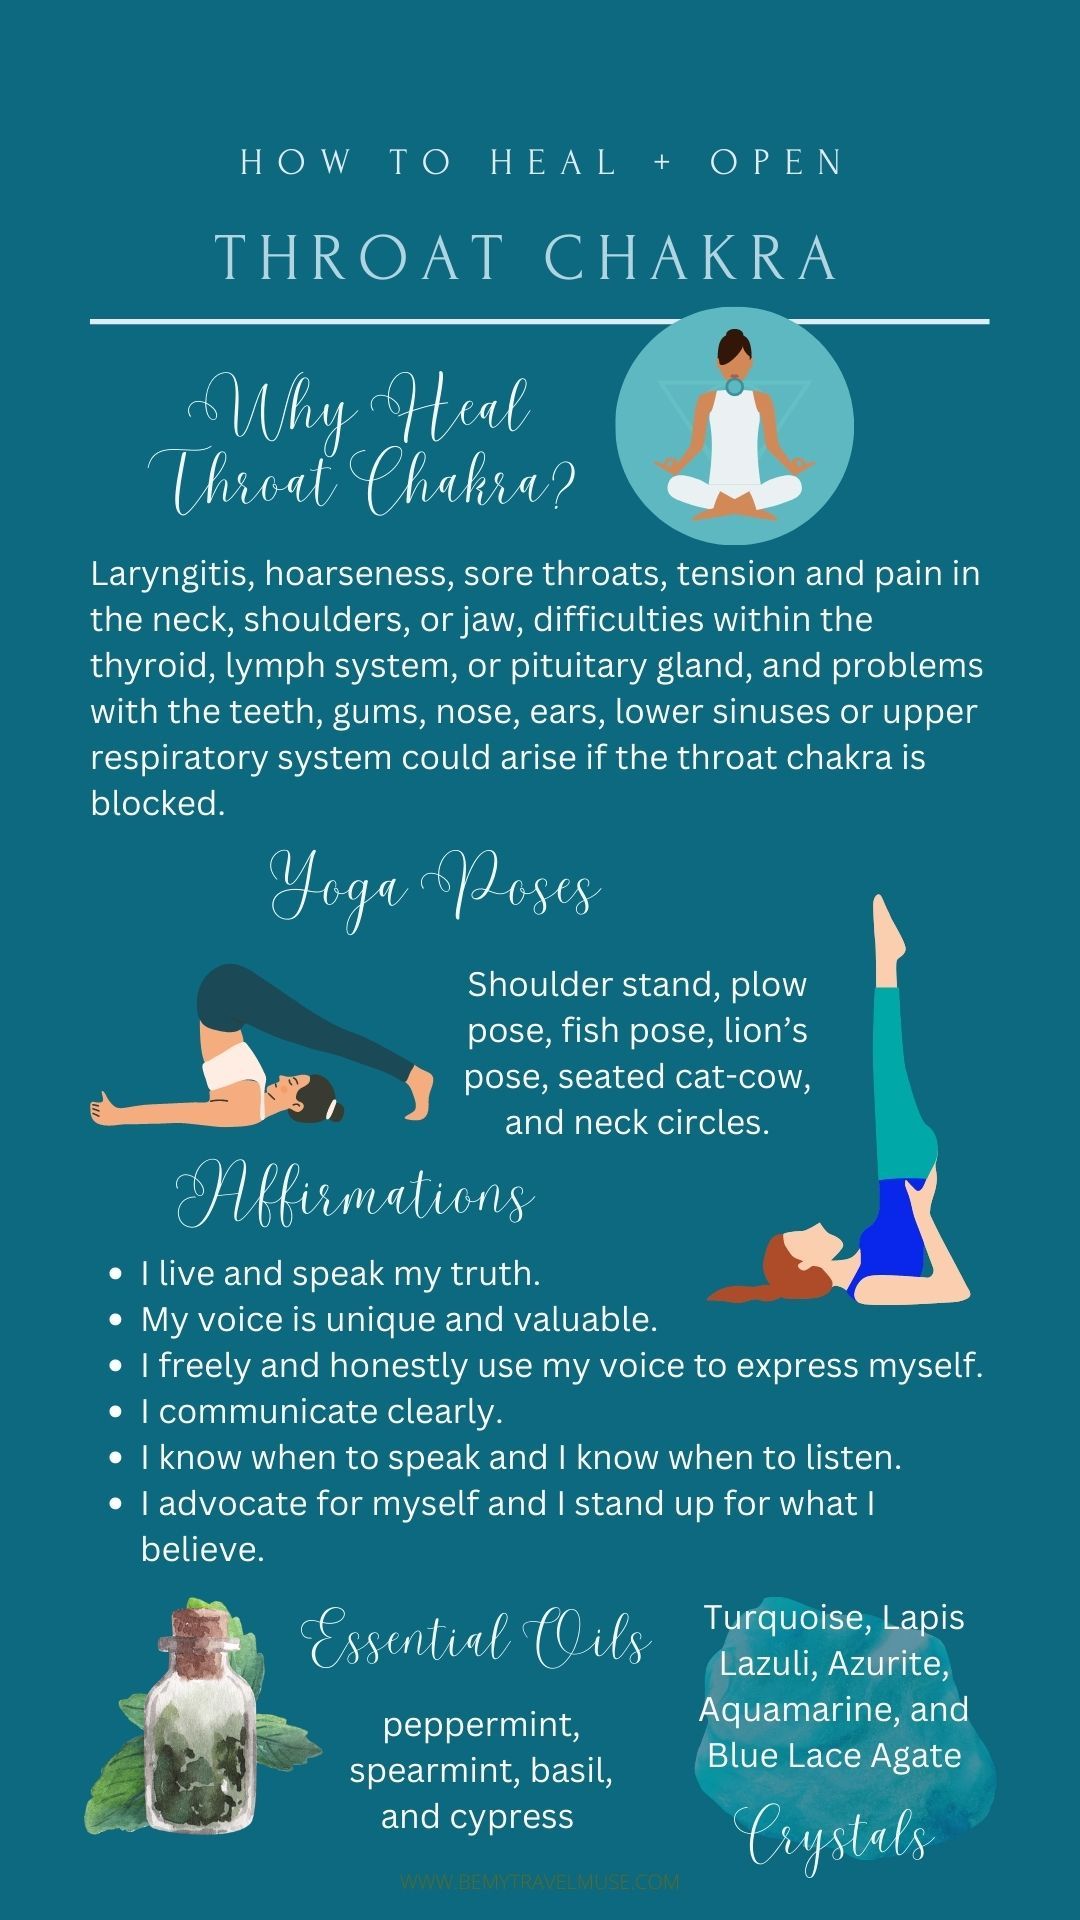 throat chakra guide. how to open and heal throat chakra using meditation, essential oil and affirmations.